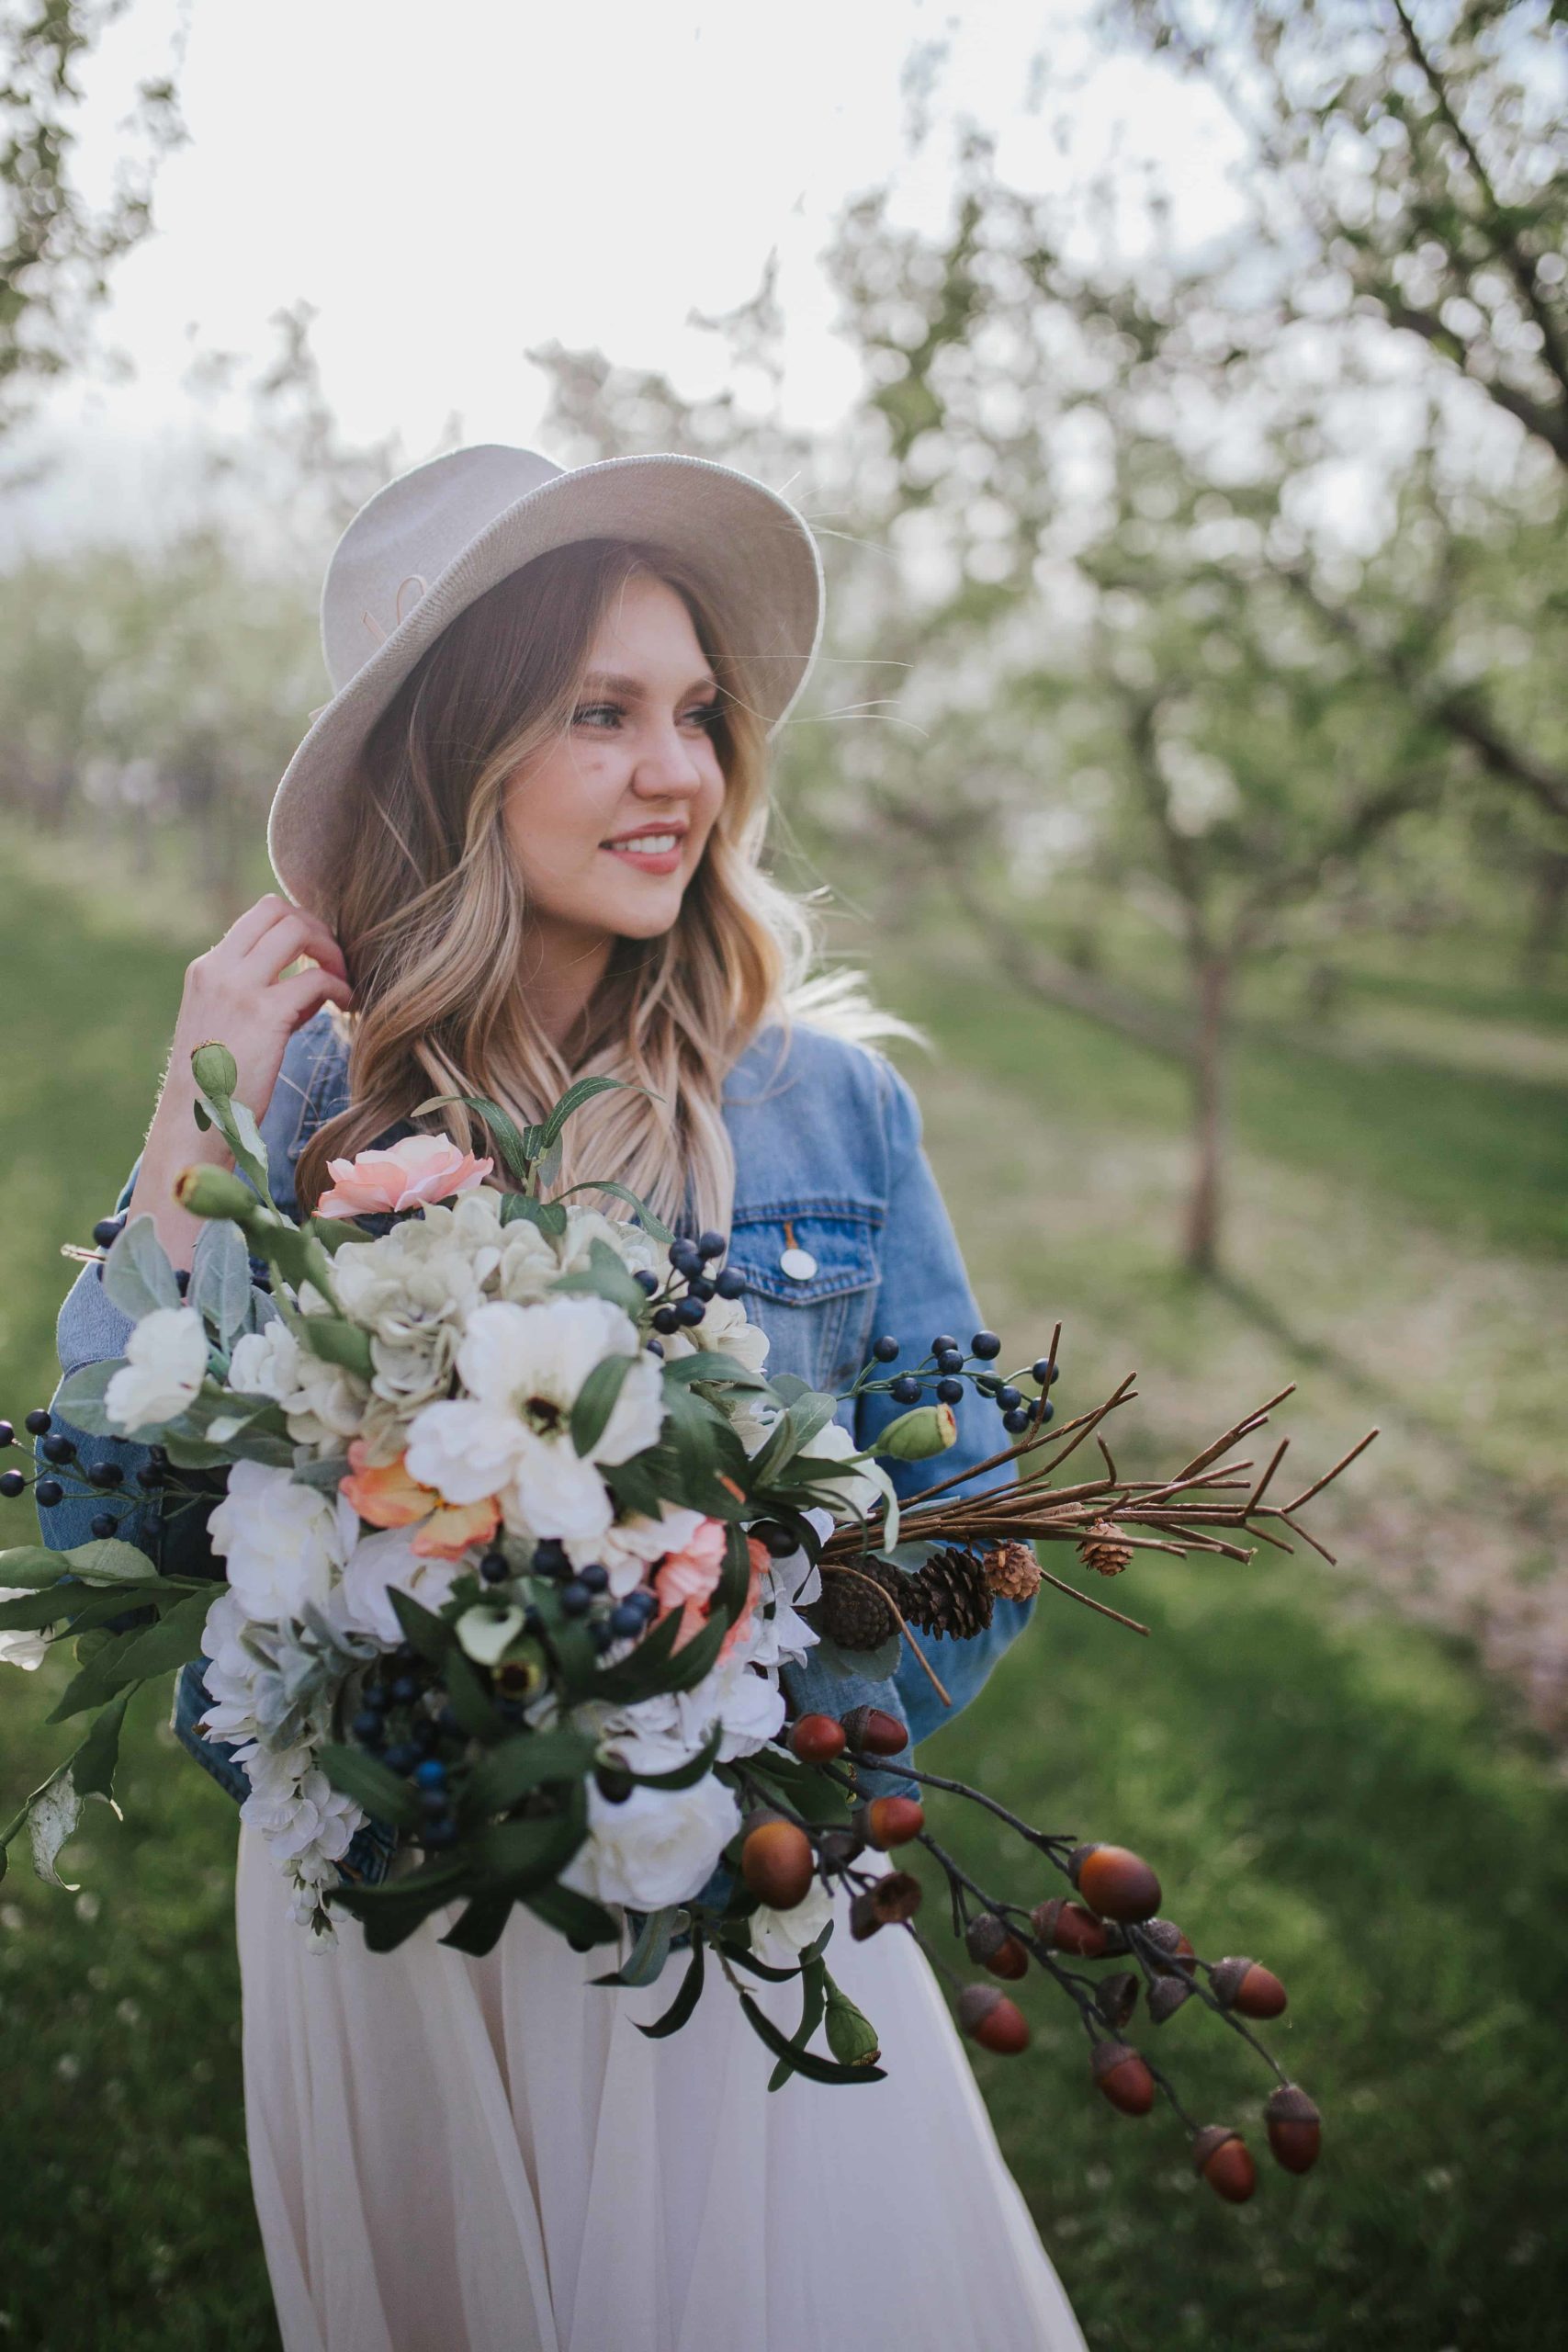 boho chic bride wearing a cream hat and denim jacket with wedding dress holding bouquet